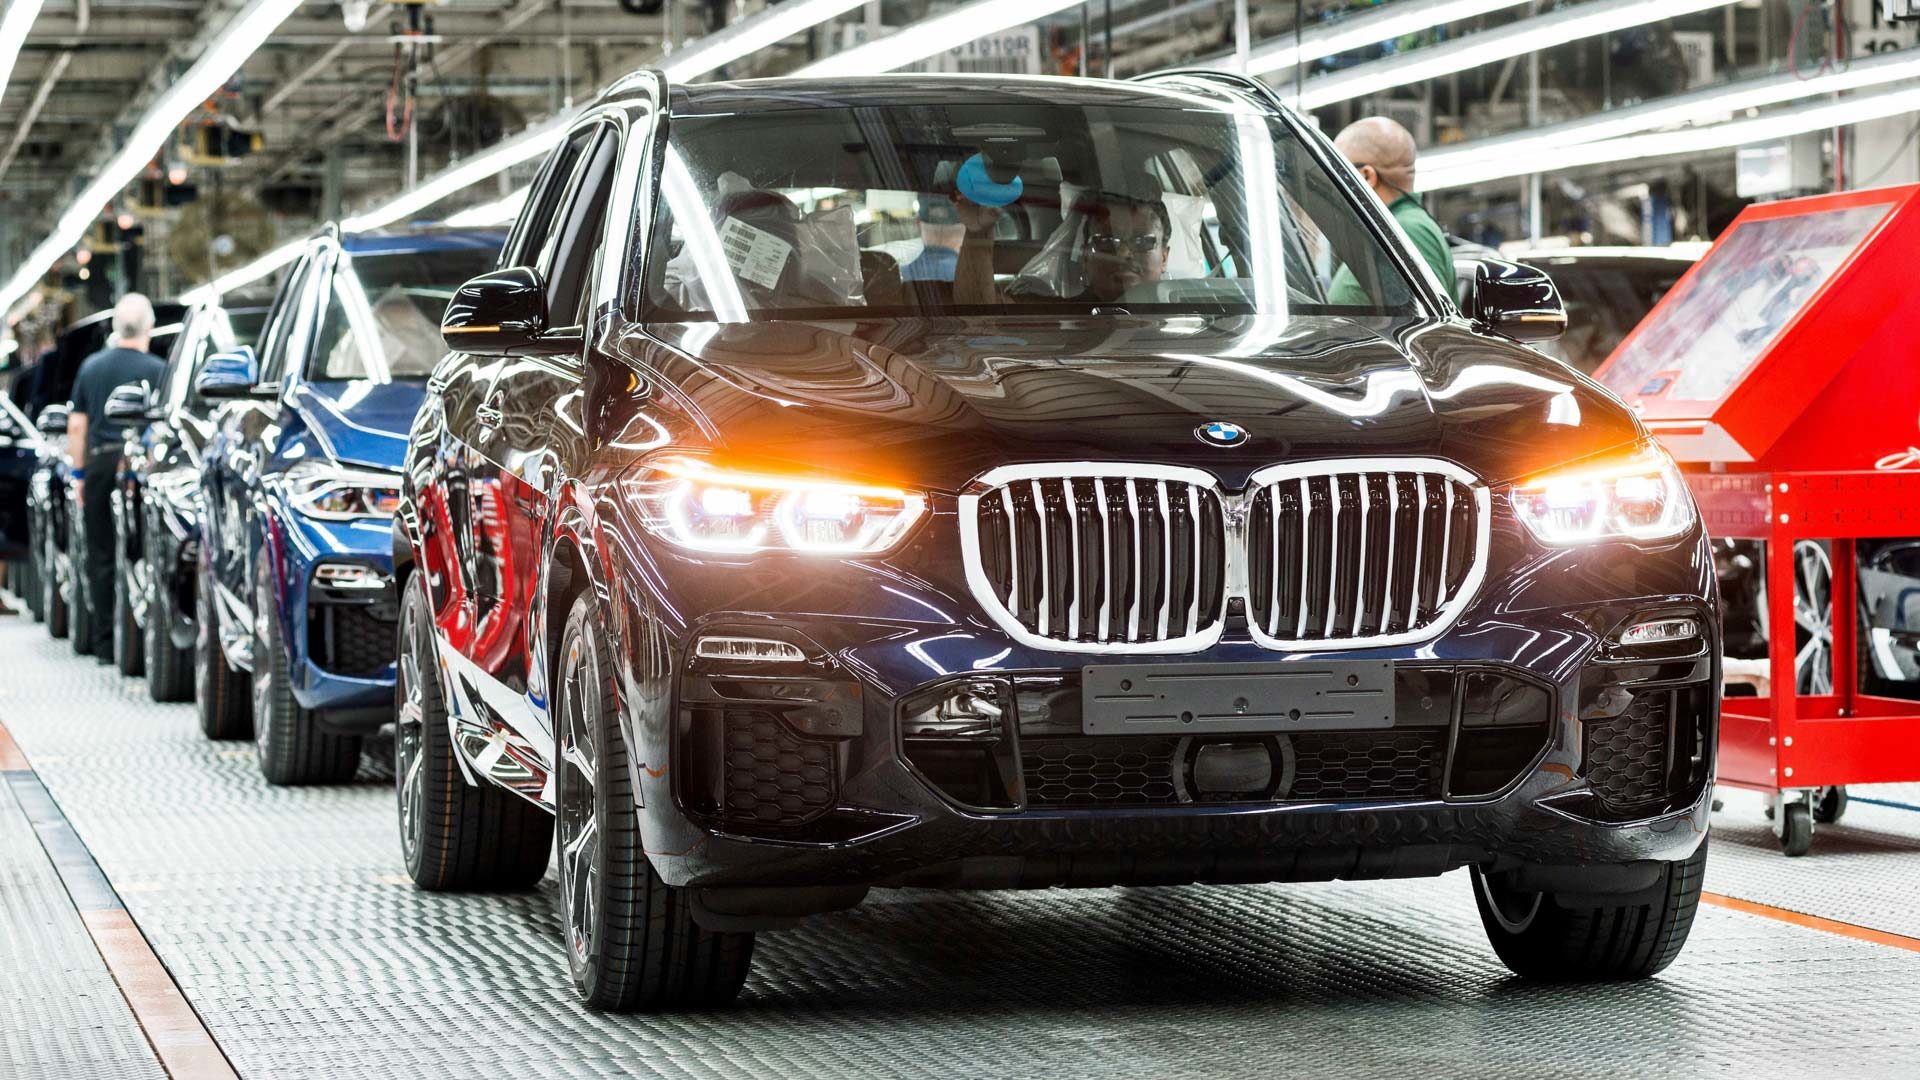 BMW Manufacturing Is USA's Largest Exporter